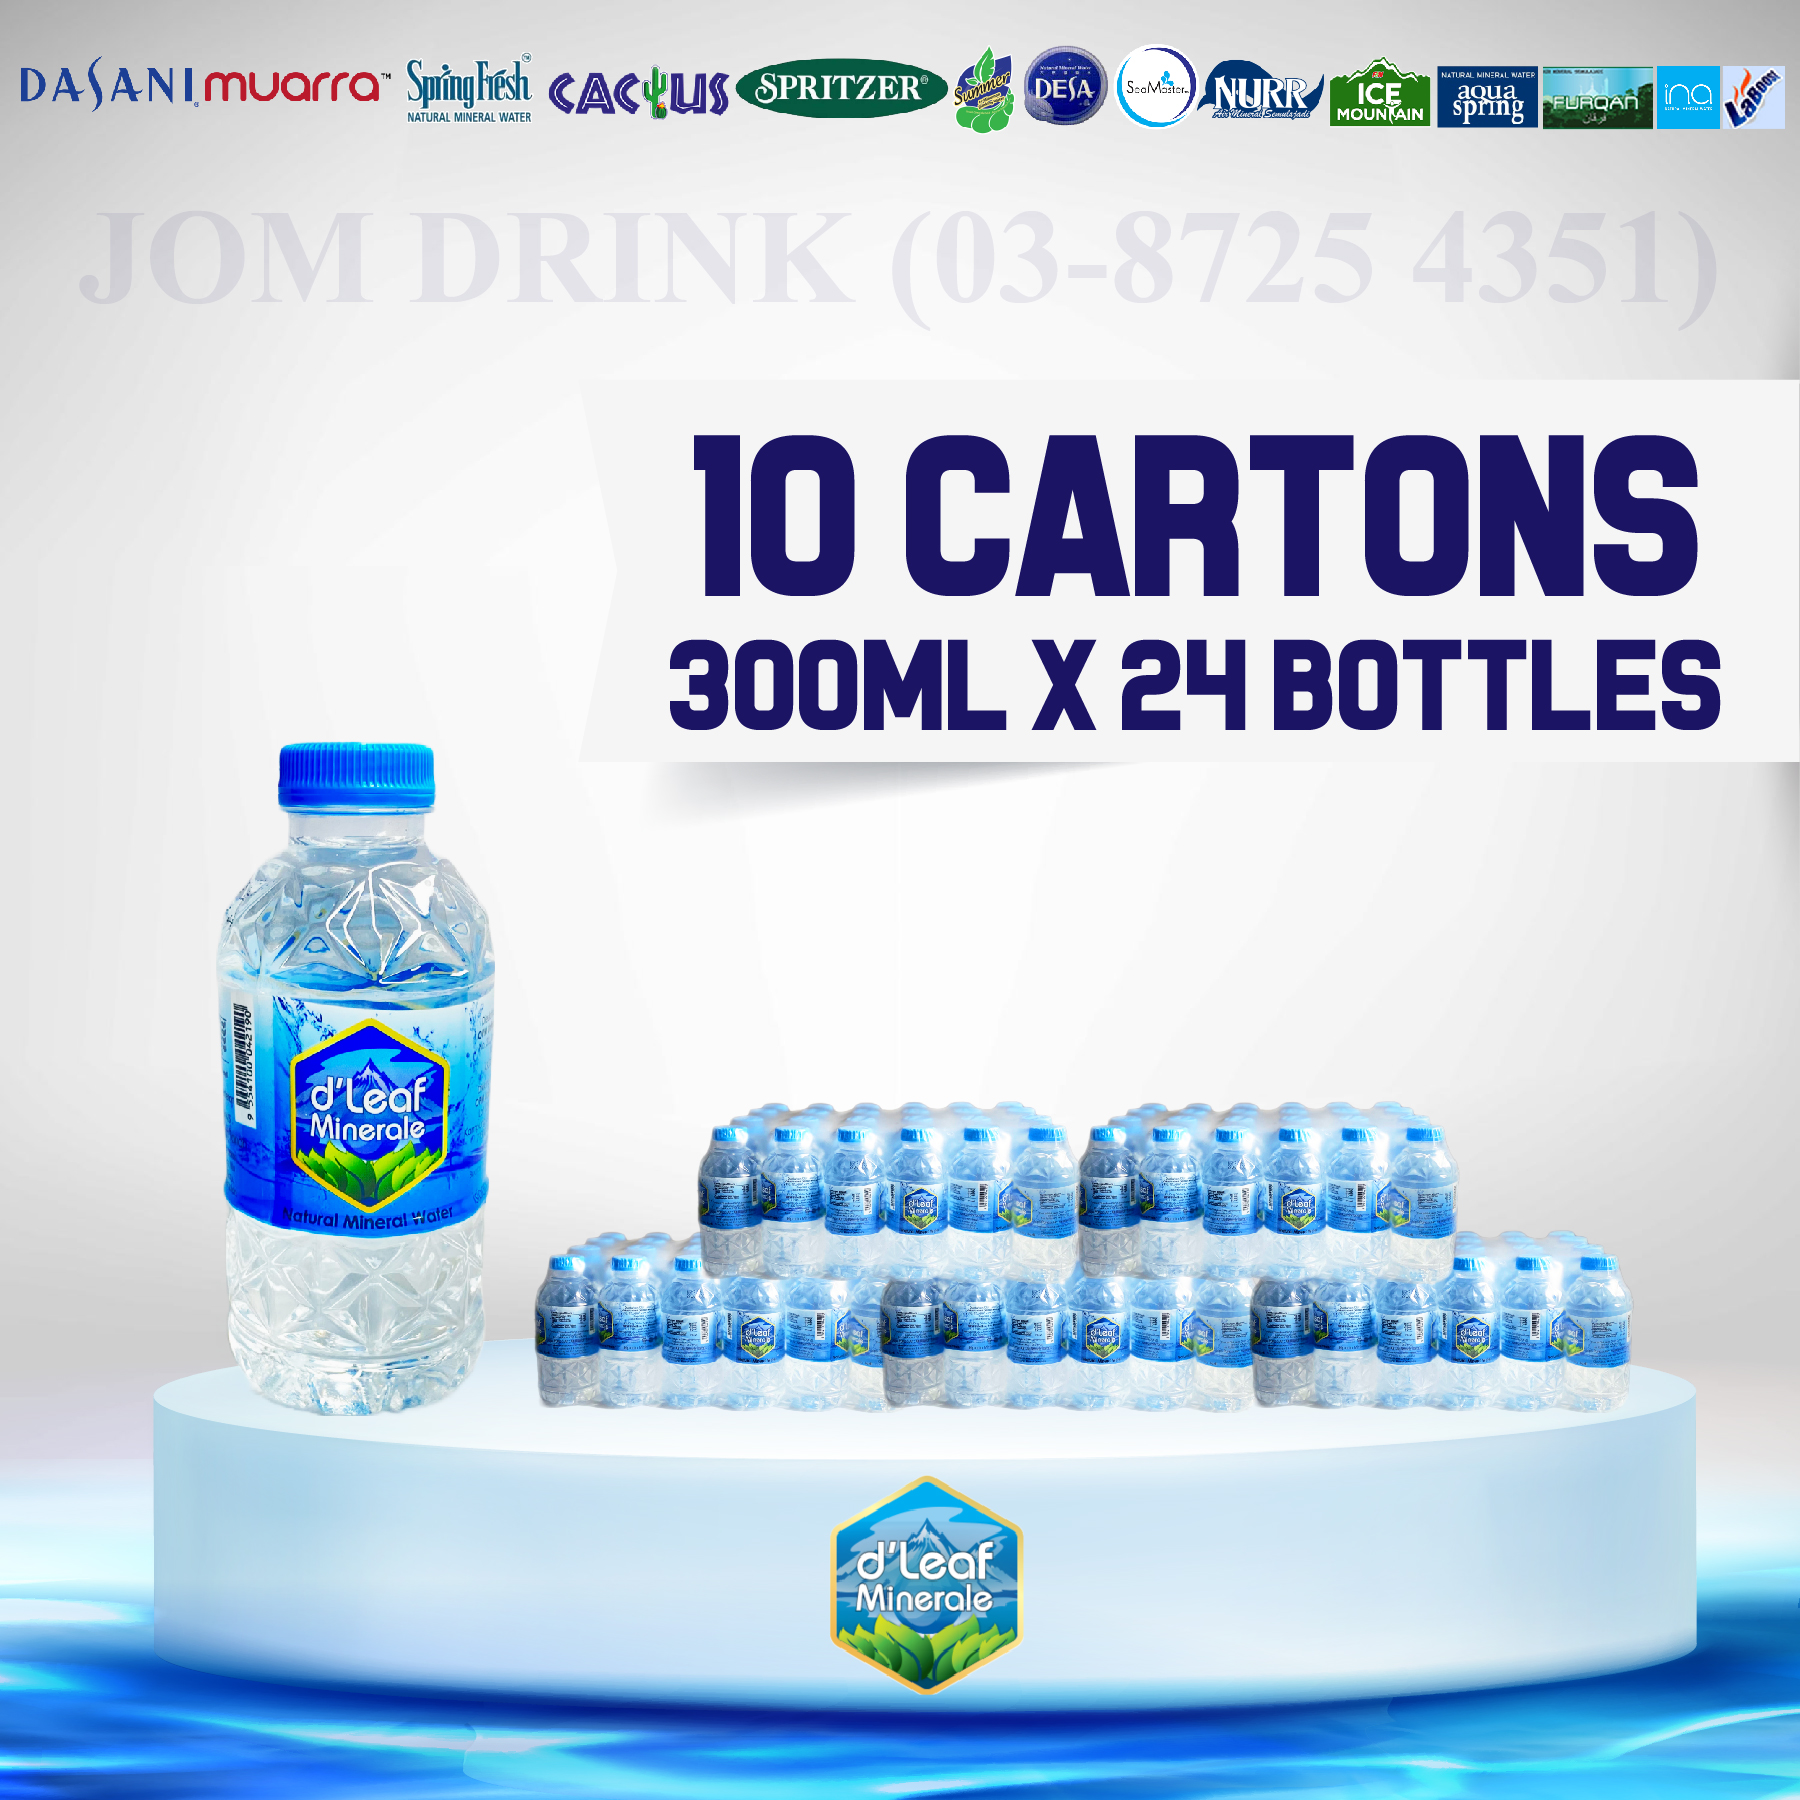 PACKAGES OF 10 BOXES : D’LEAF MINERALE MINERAL WATER 300ML